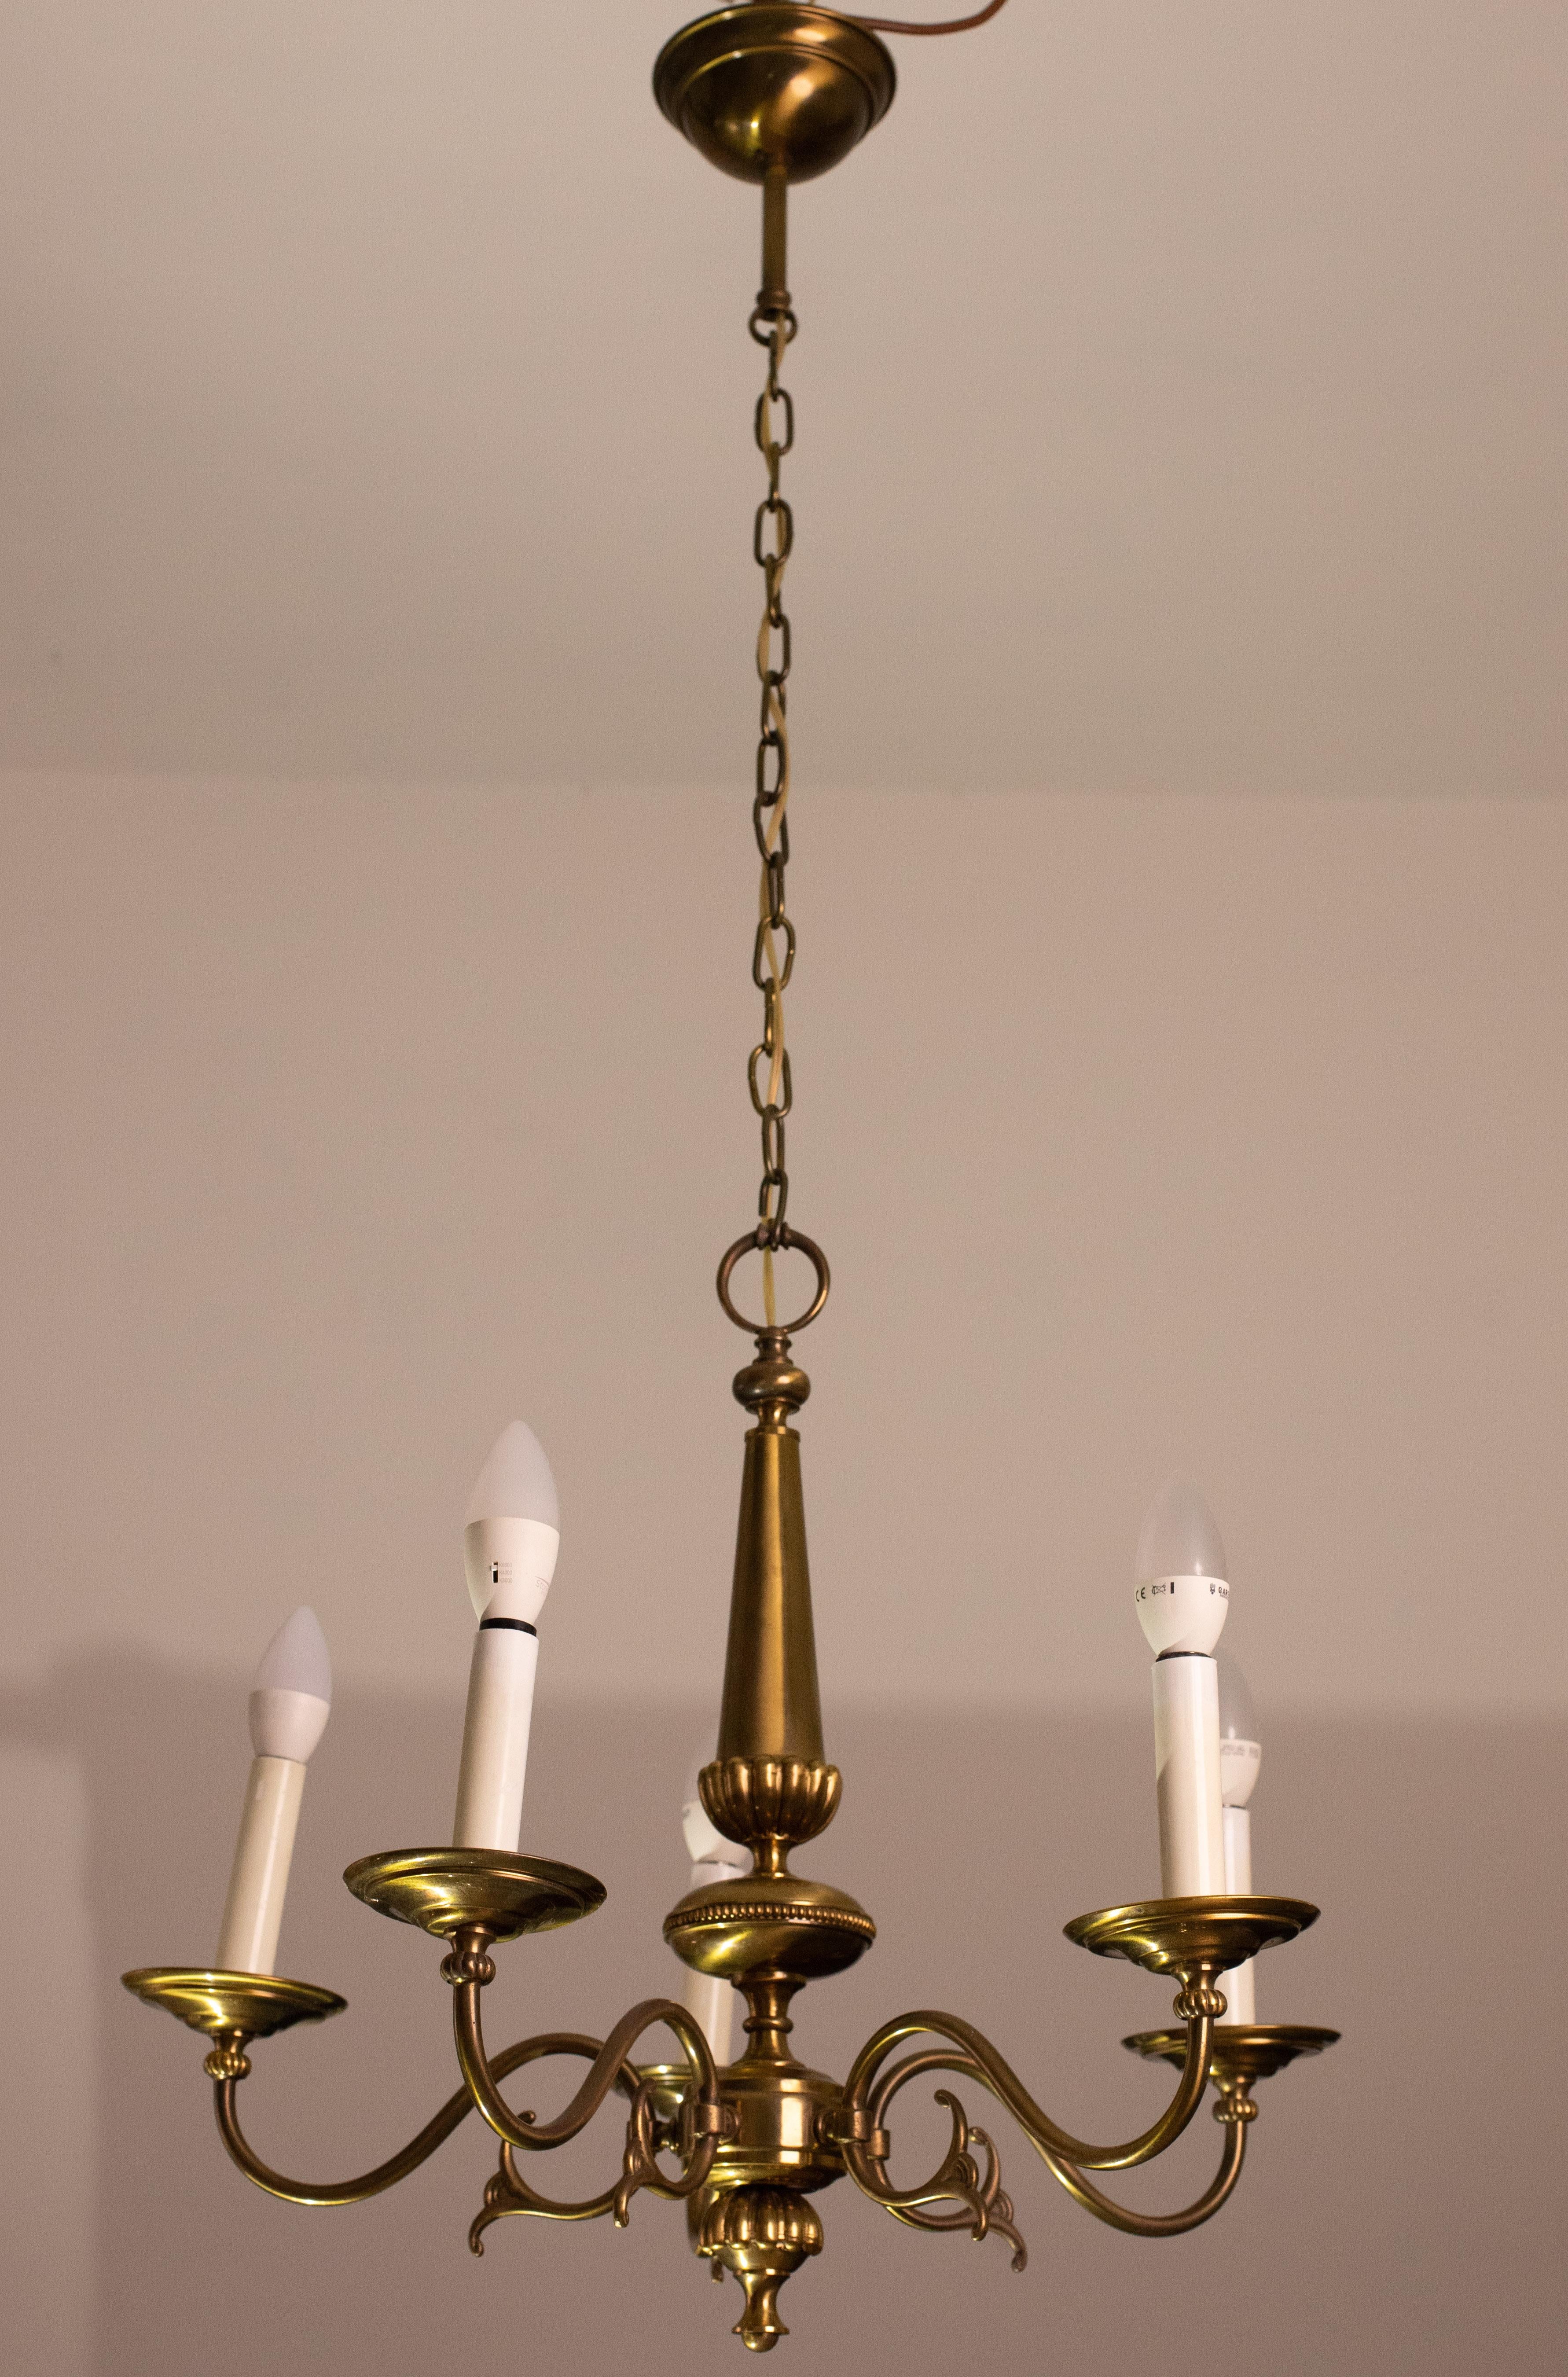 Unique design piece for any space, vintage brass chandelier signed Sciolari, see last photo, model 526, 1950.

Good vintage condition, brass material.

Height with chain 115 centimetres, height without chain 60 centimetres, diameter 60 centimetres,